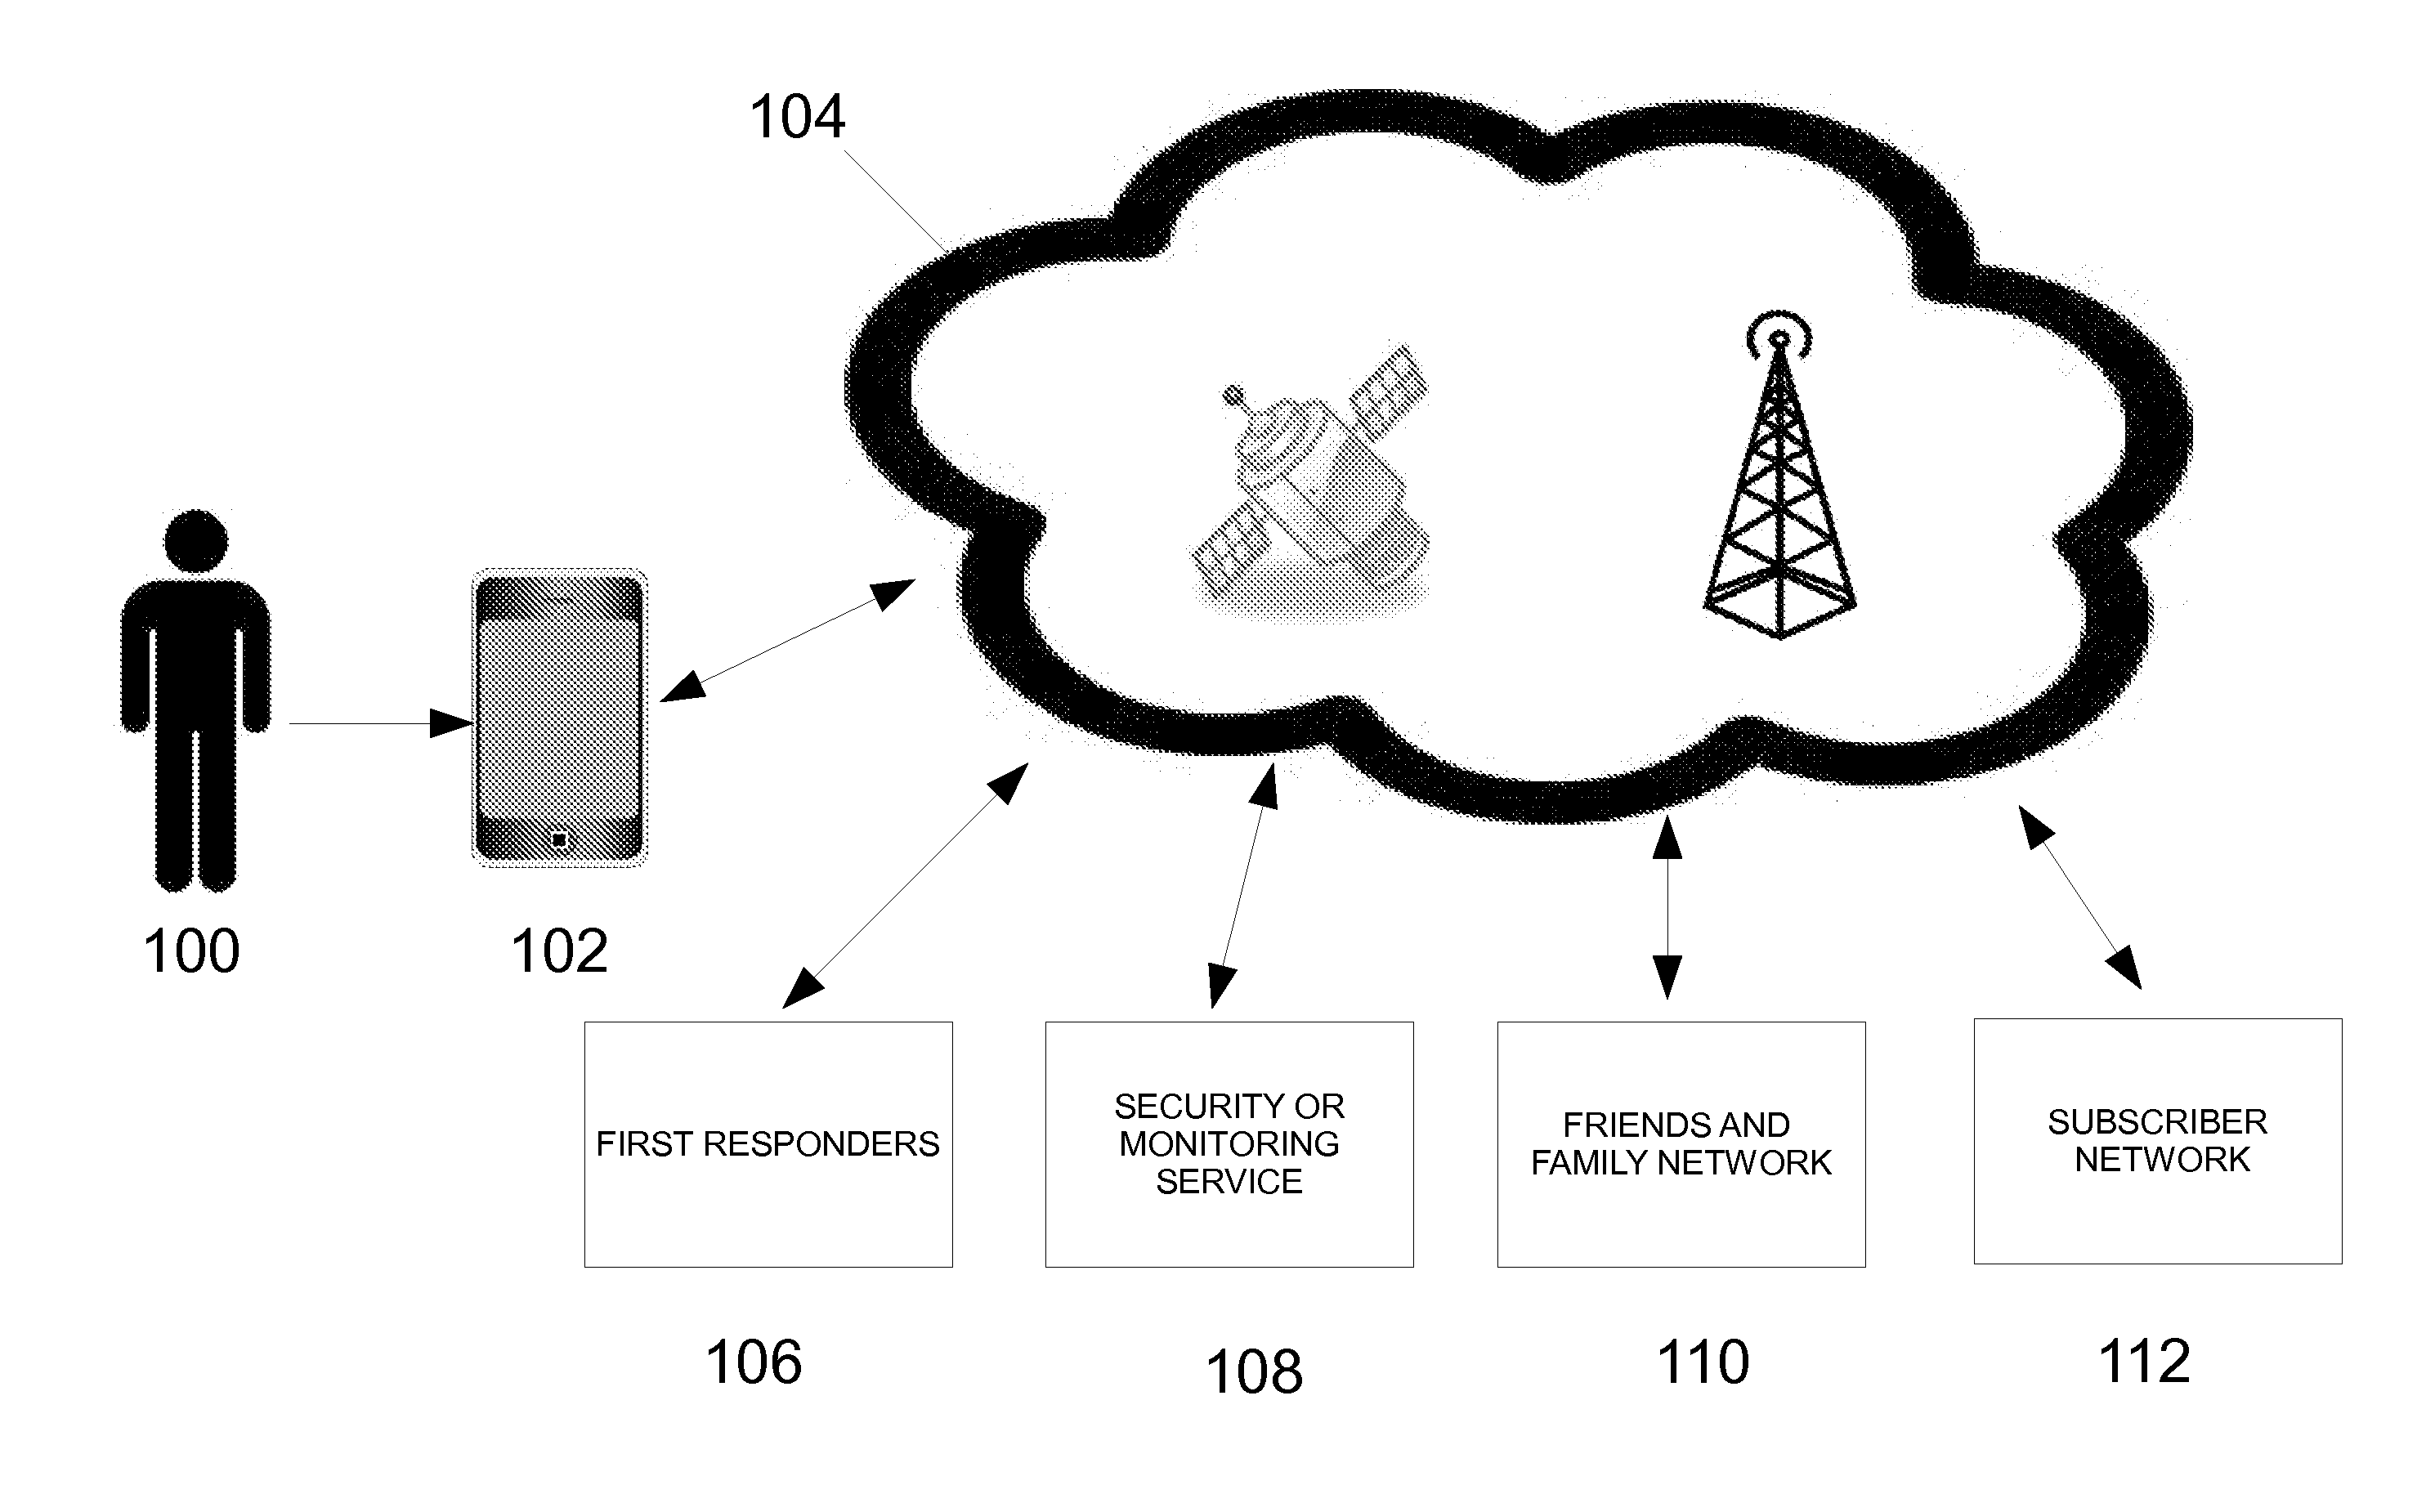 Systems and methods for initiating a distress signal from a mobile device without requiring focused visual attention from a user